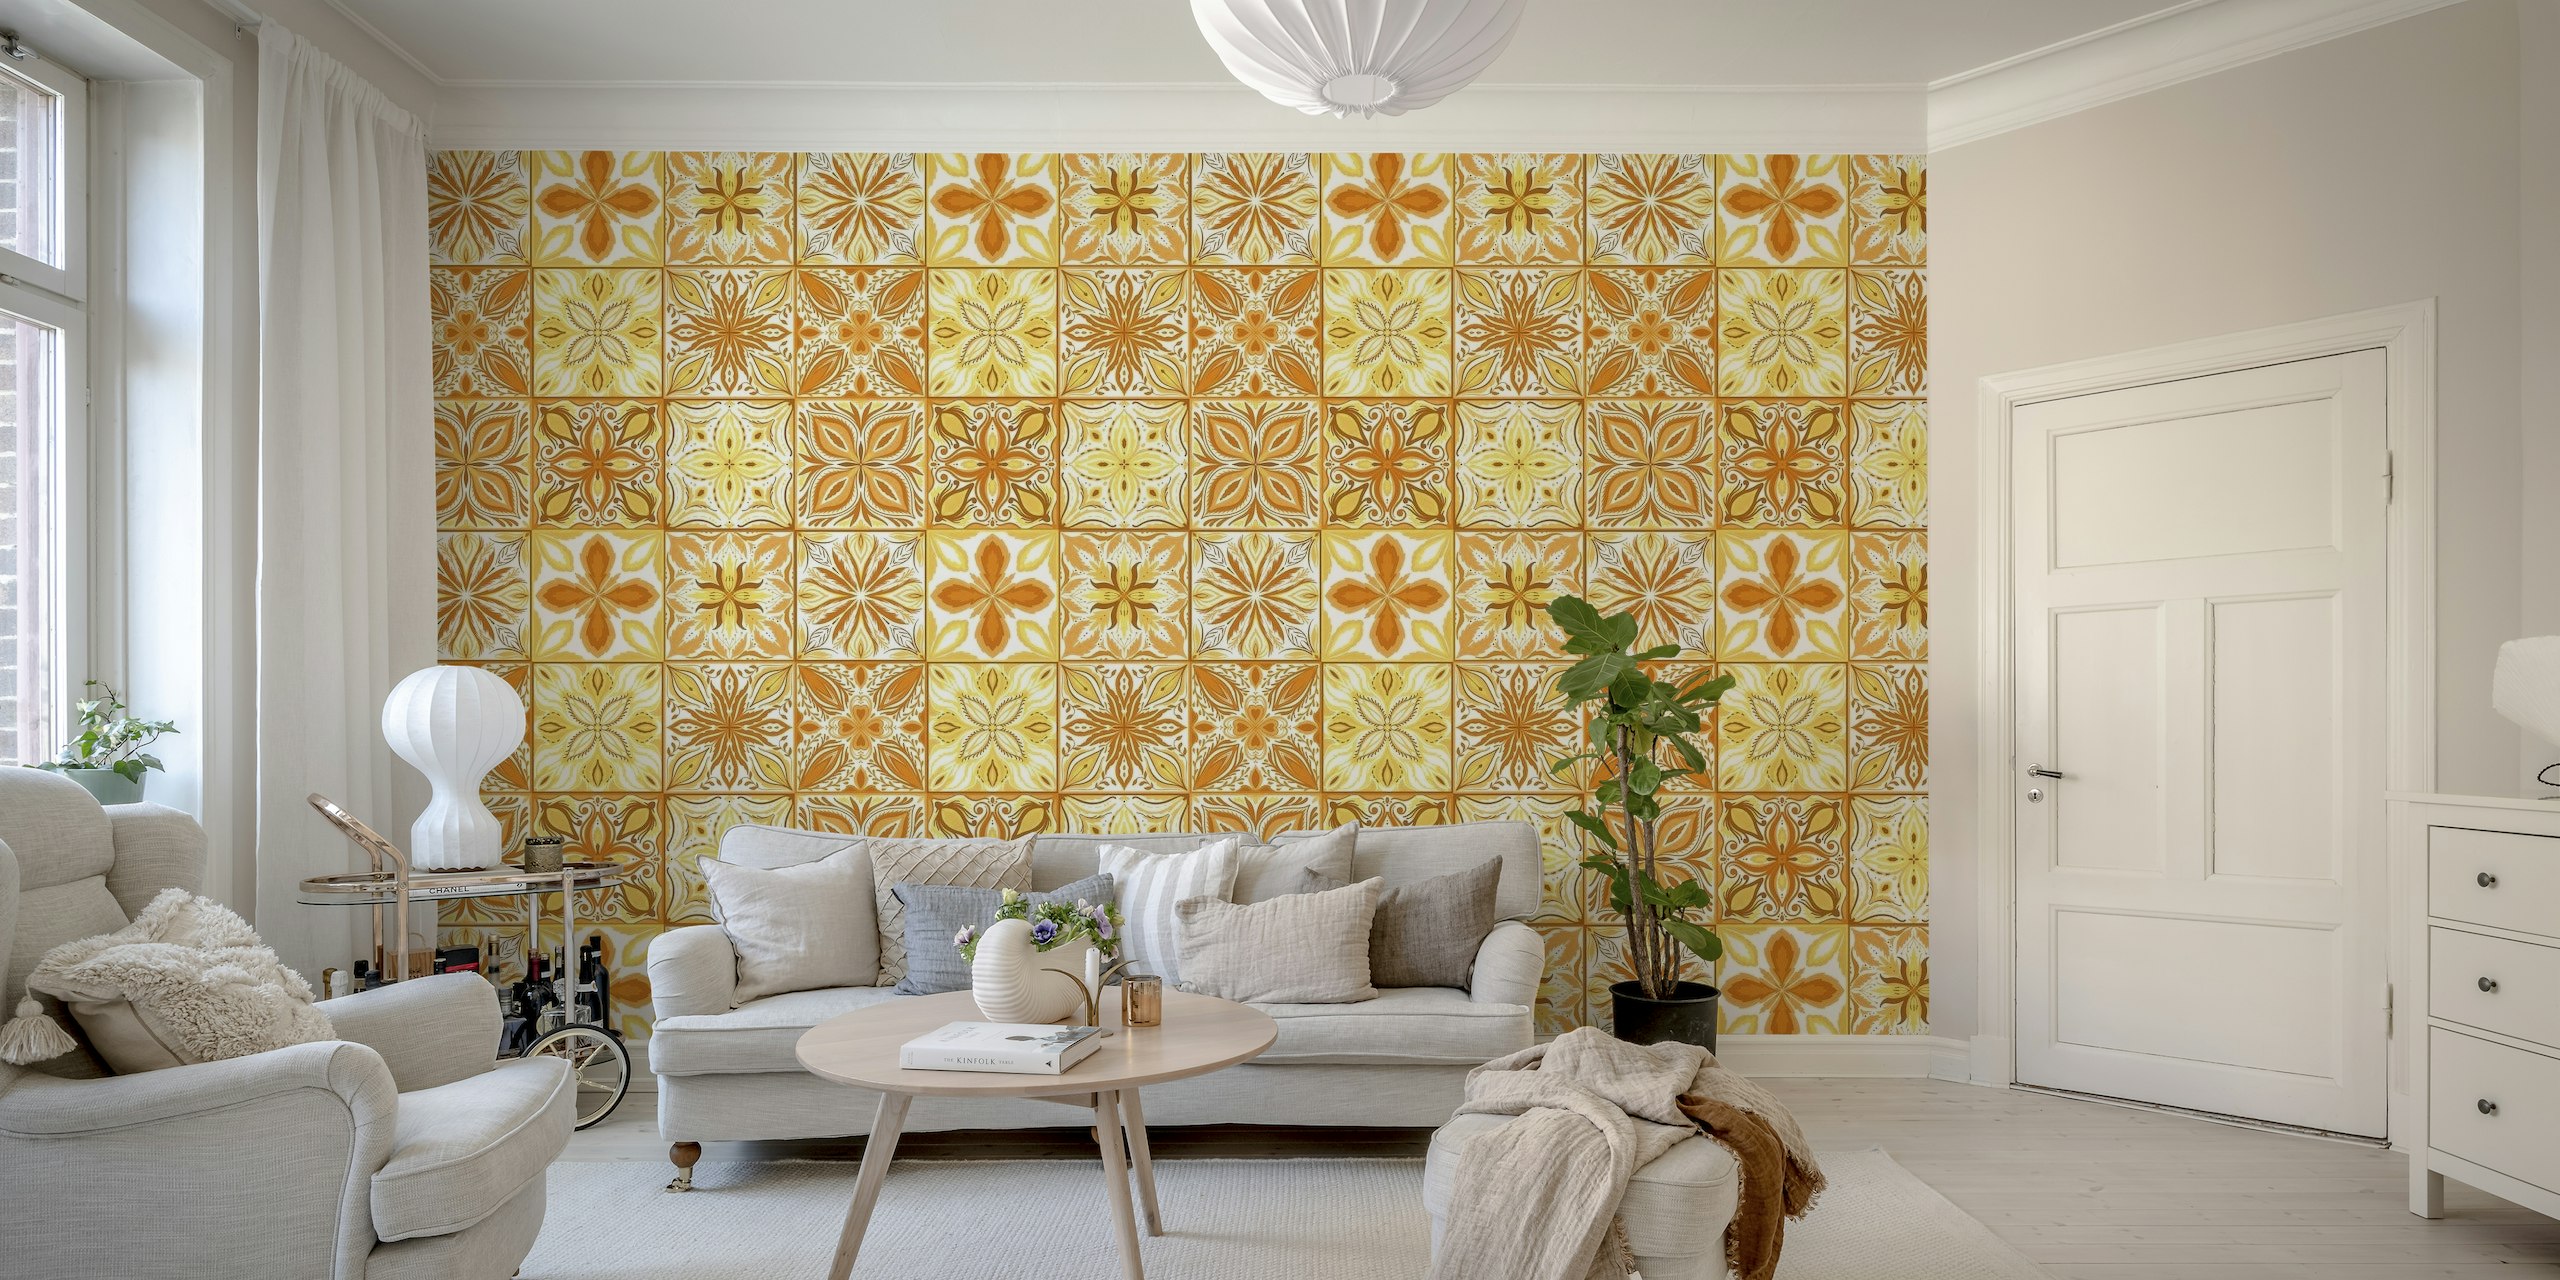 Ornate tiles in orange and yellow papiers peint